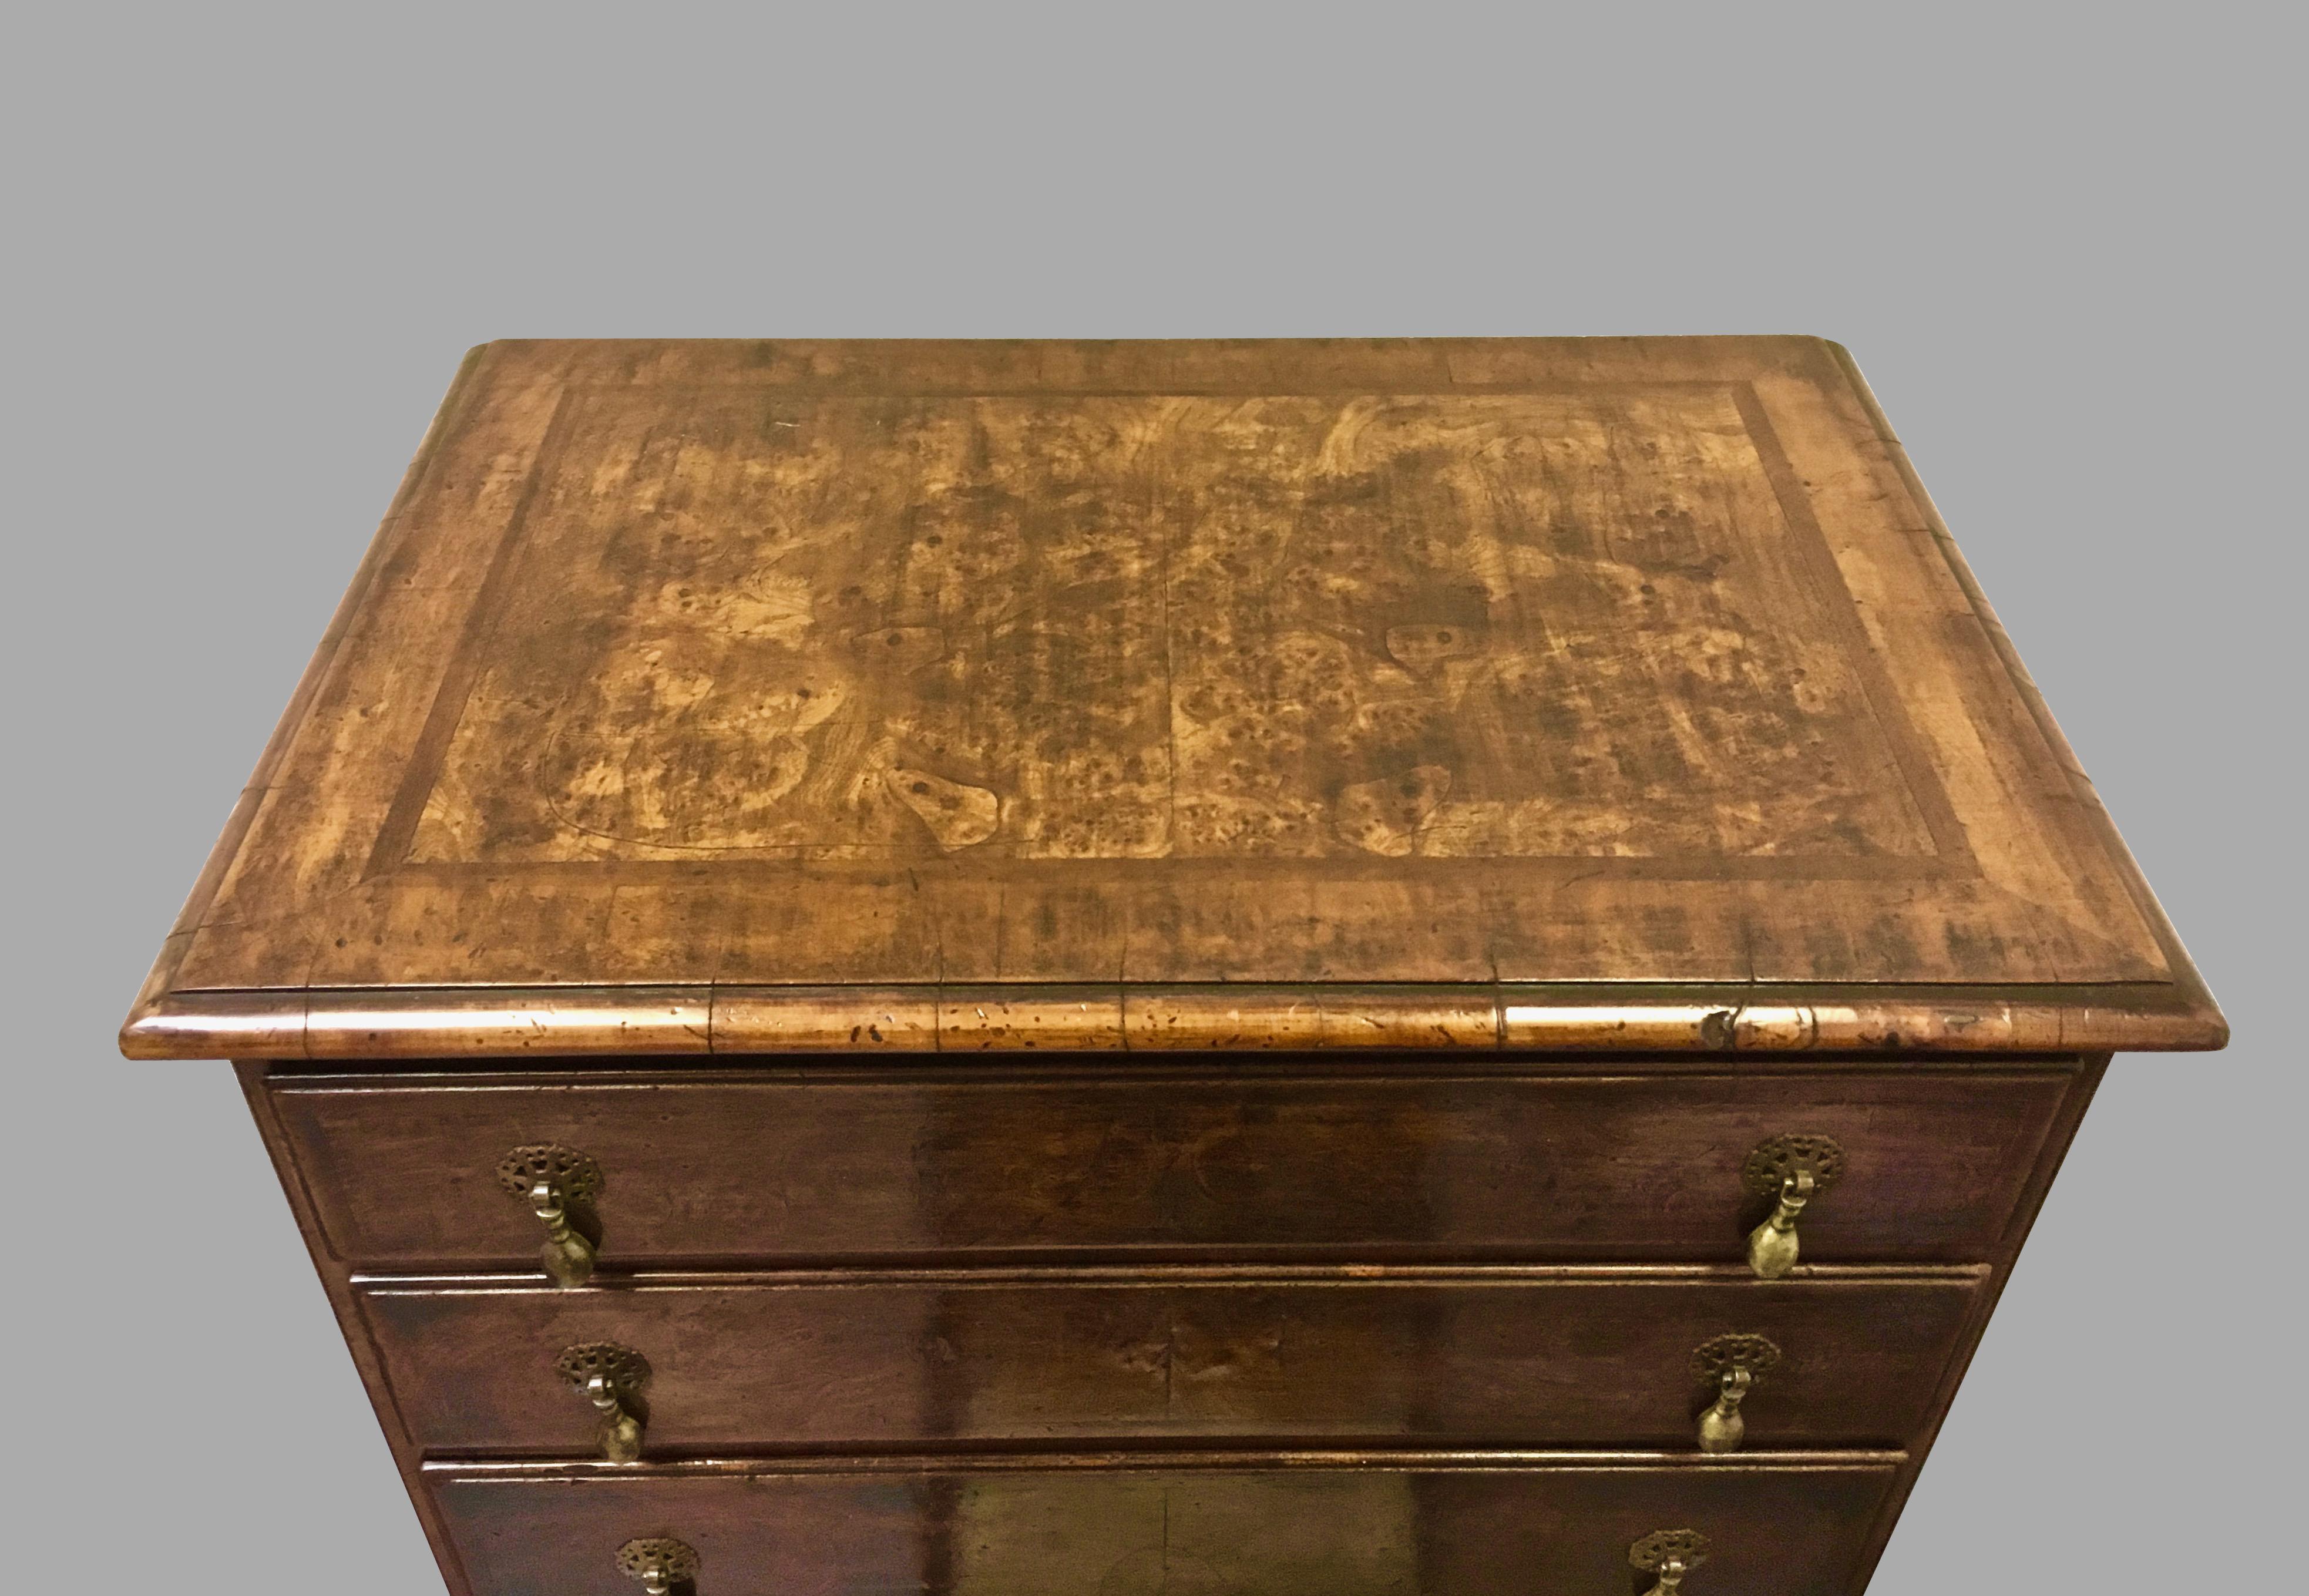 An inlaid burl walnut veneered Georgian style four-drawer chest of desirable small size, the crossbanded top with a molded edge above 4 graduated short drawers with brass teardrop pulls, the sides with crossbanded edges, all supported on square